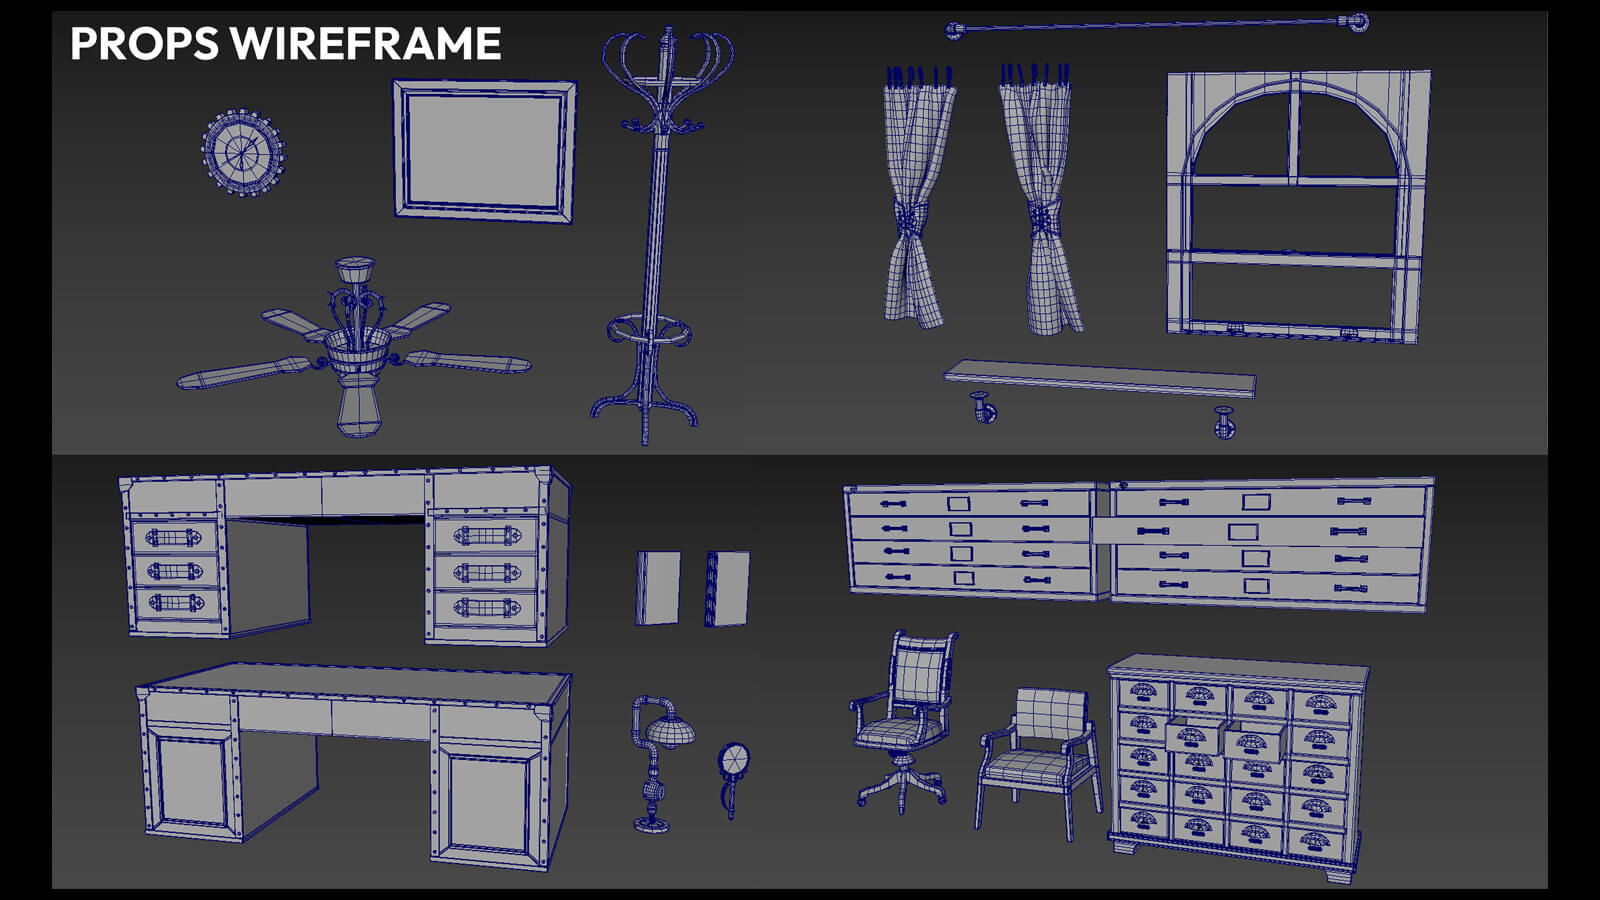 Wireframe images of 3D mesh props that were used in the making of the video